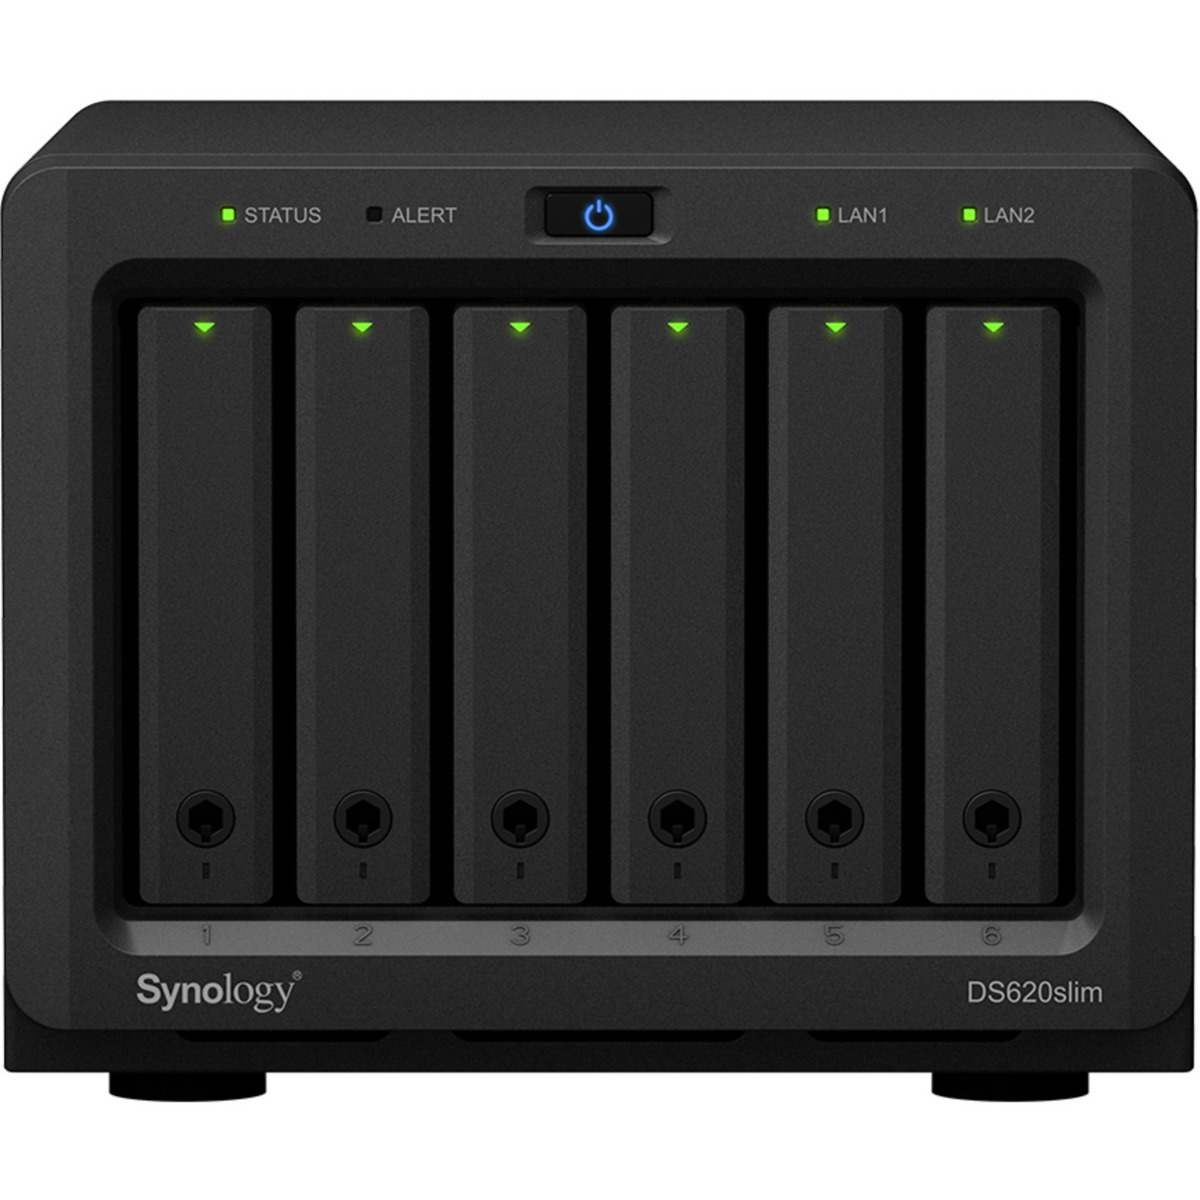 Synology DiskStation DS620slim 3.8tb 6-Bay Desktop Multimedia / Power User / Business NAS - Network Attached Storage Device 4x960gb Synology SAT5210 Series SAT5210-960G 2.5 530/500MB/s SATA 6Gb/s SSD ENTERPRISE Class Drives Installed - Burn-In Tested - FREE RAM UPGRADE DiskStation DS620slim